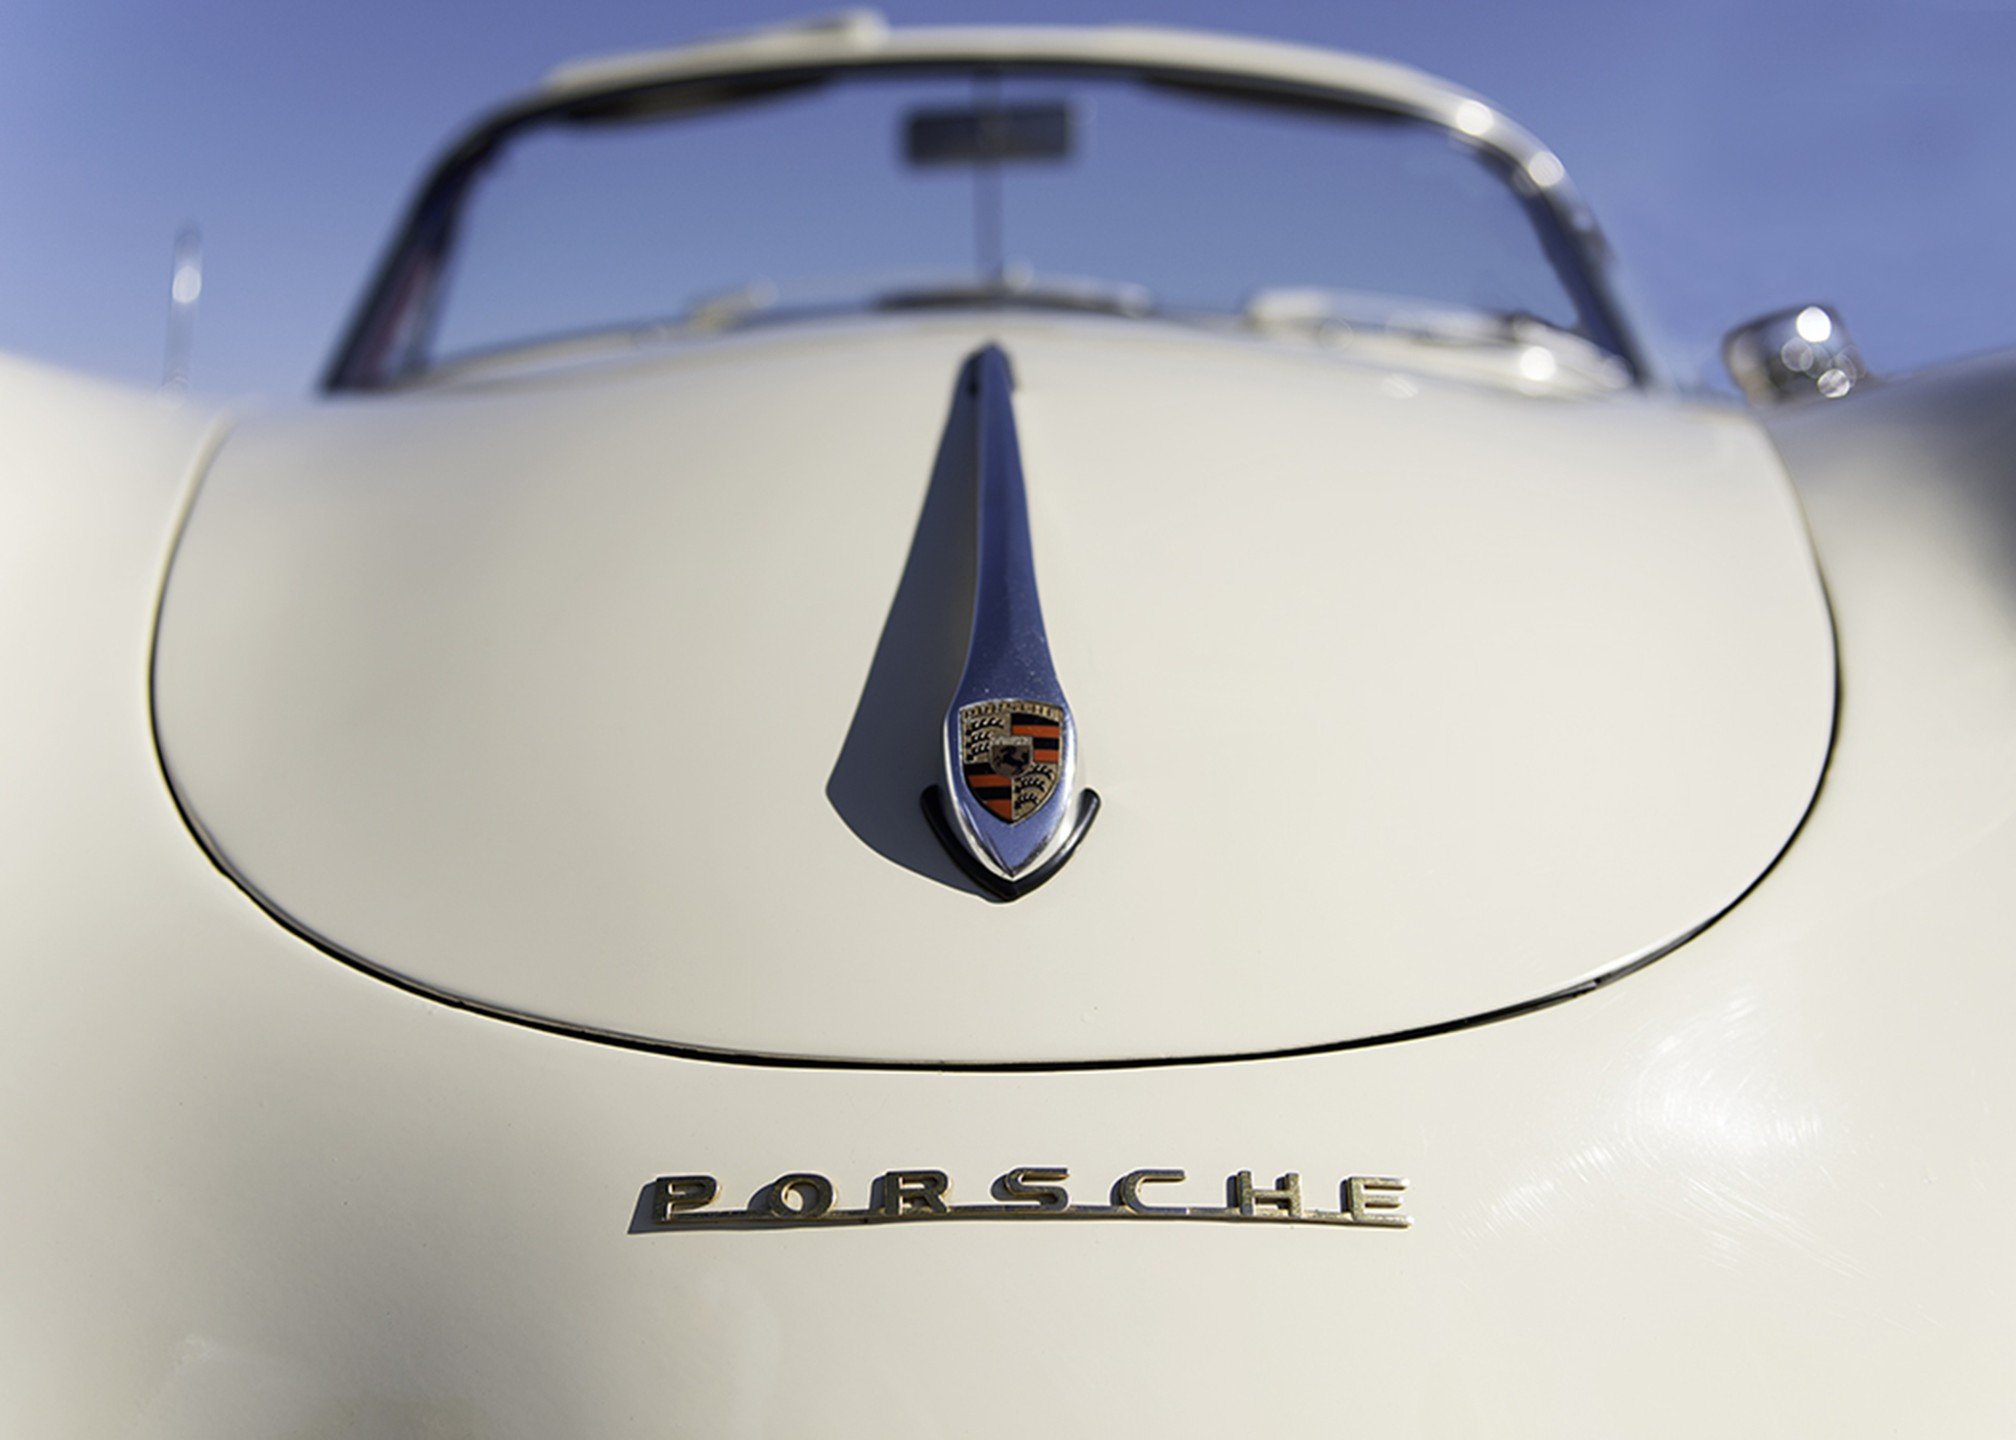 Porsche, there is no substitute!

Porsche is my favorite sports car marque. From the 356 to the 911&rsquo;s and the front-engined 9 series cars. 

In order of appearance&hellip;

356 hood!

911 hood complete with racing stripes!

911 993 model!

924S